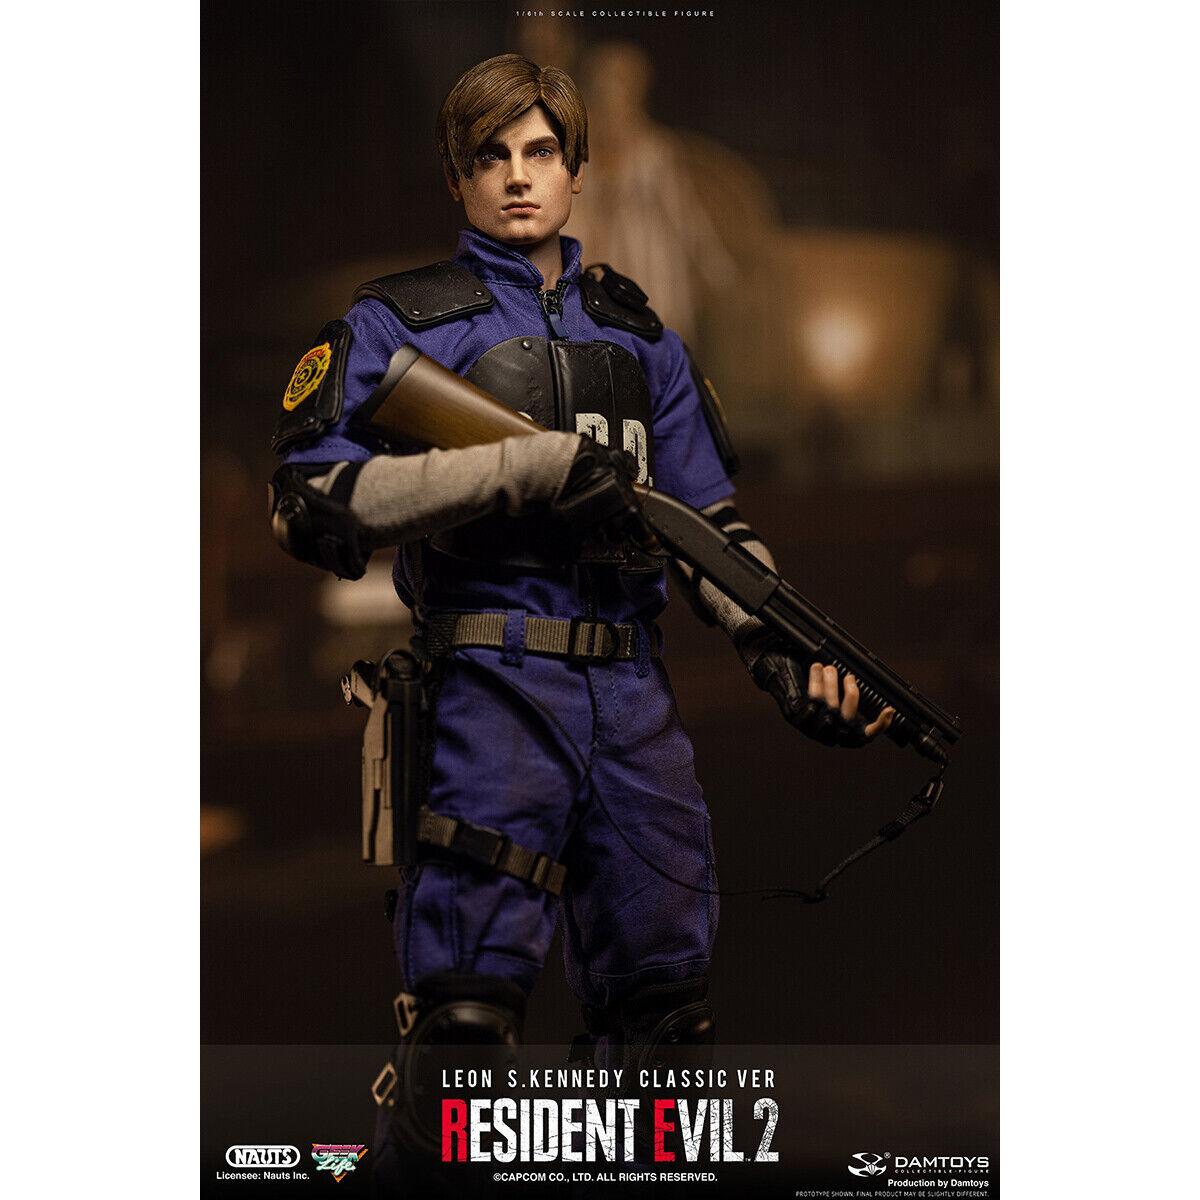 Claire Redfield - Resident Evil 2 - DAM Toys 1/6 Scale Figure